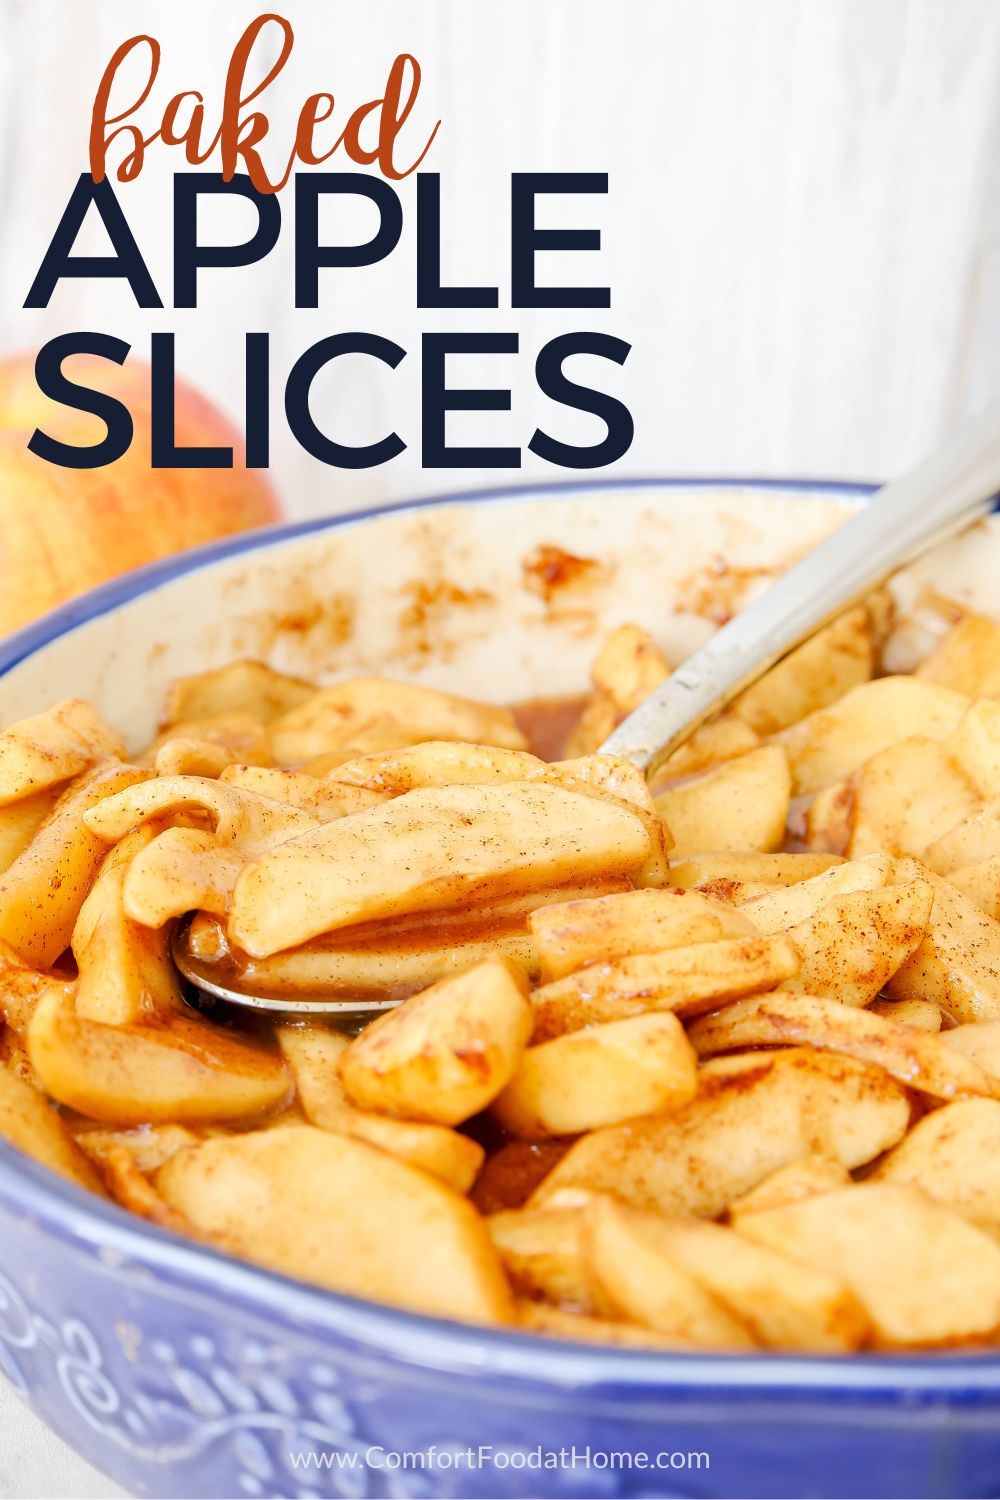 baked apple slices recipe